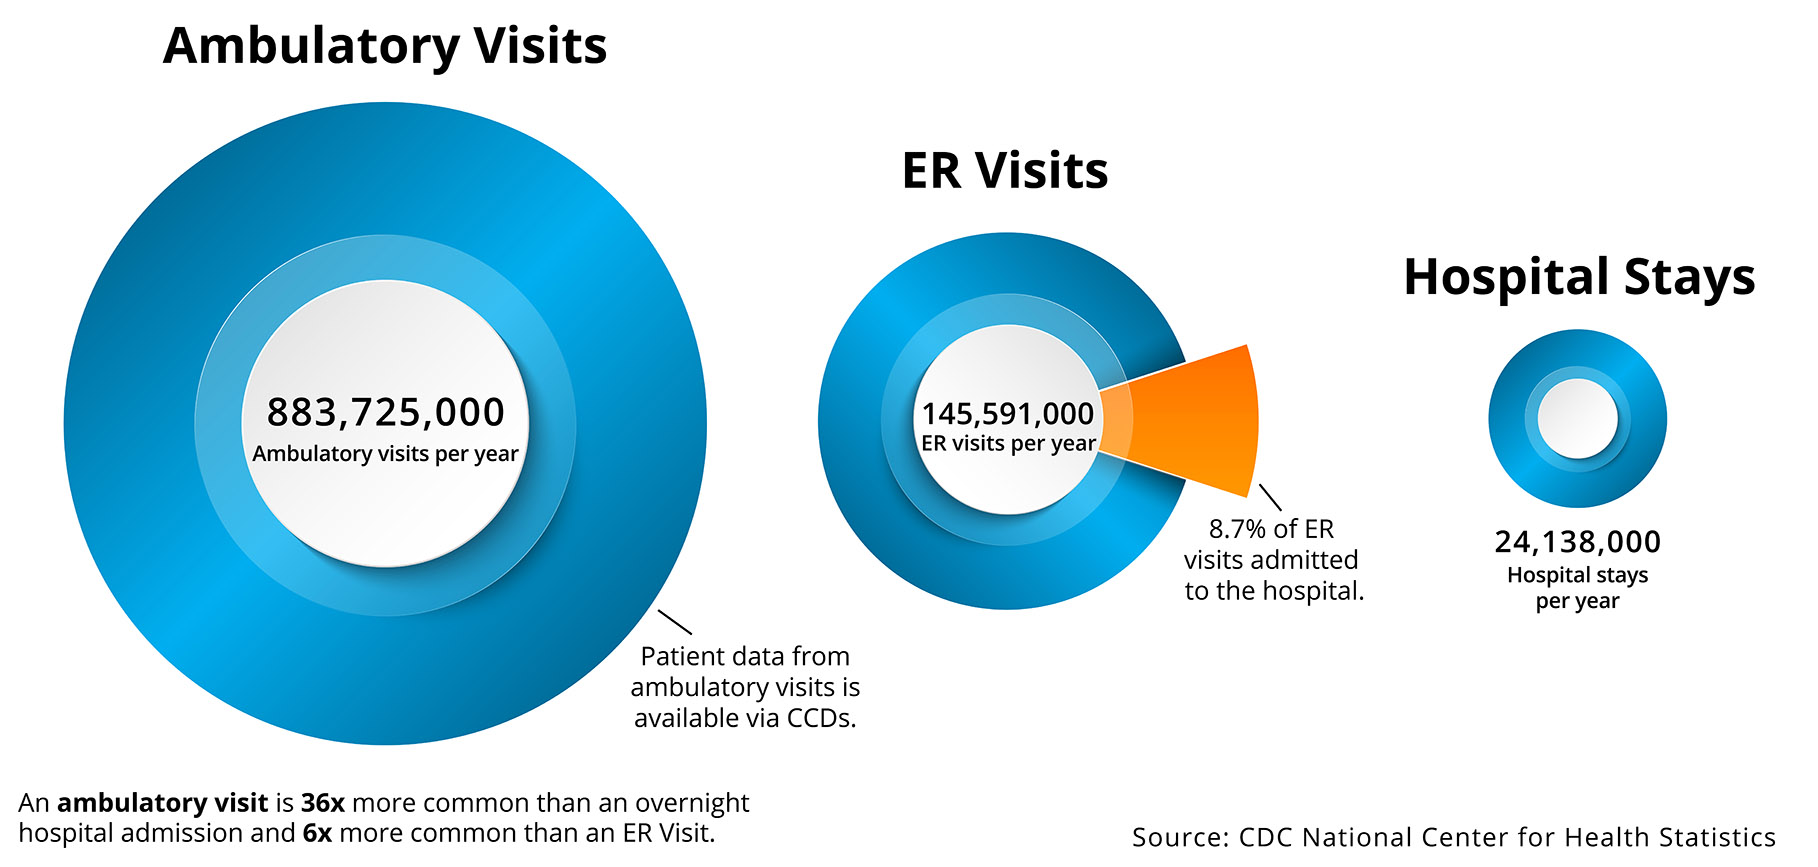 Infographic showing annual ambulatory visits, ER visits, and hospital stays